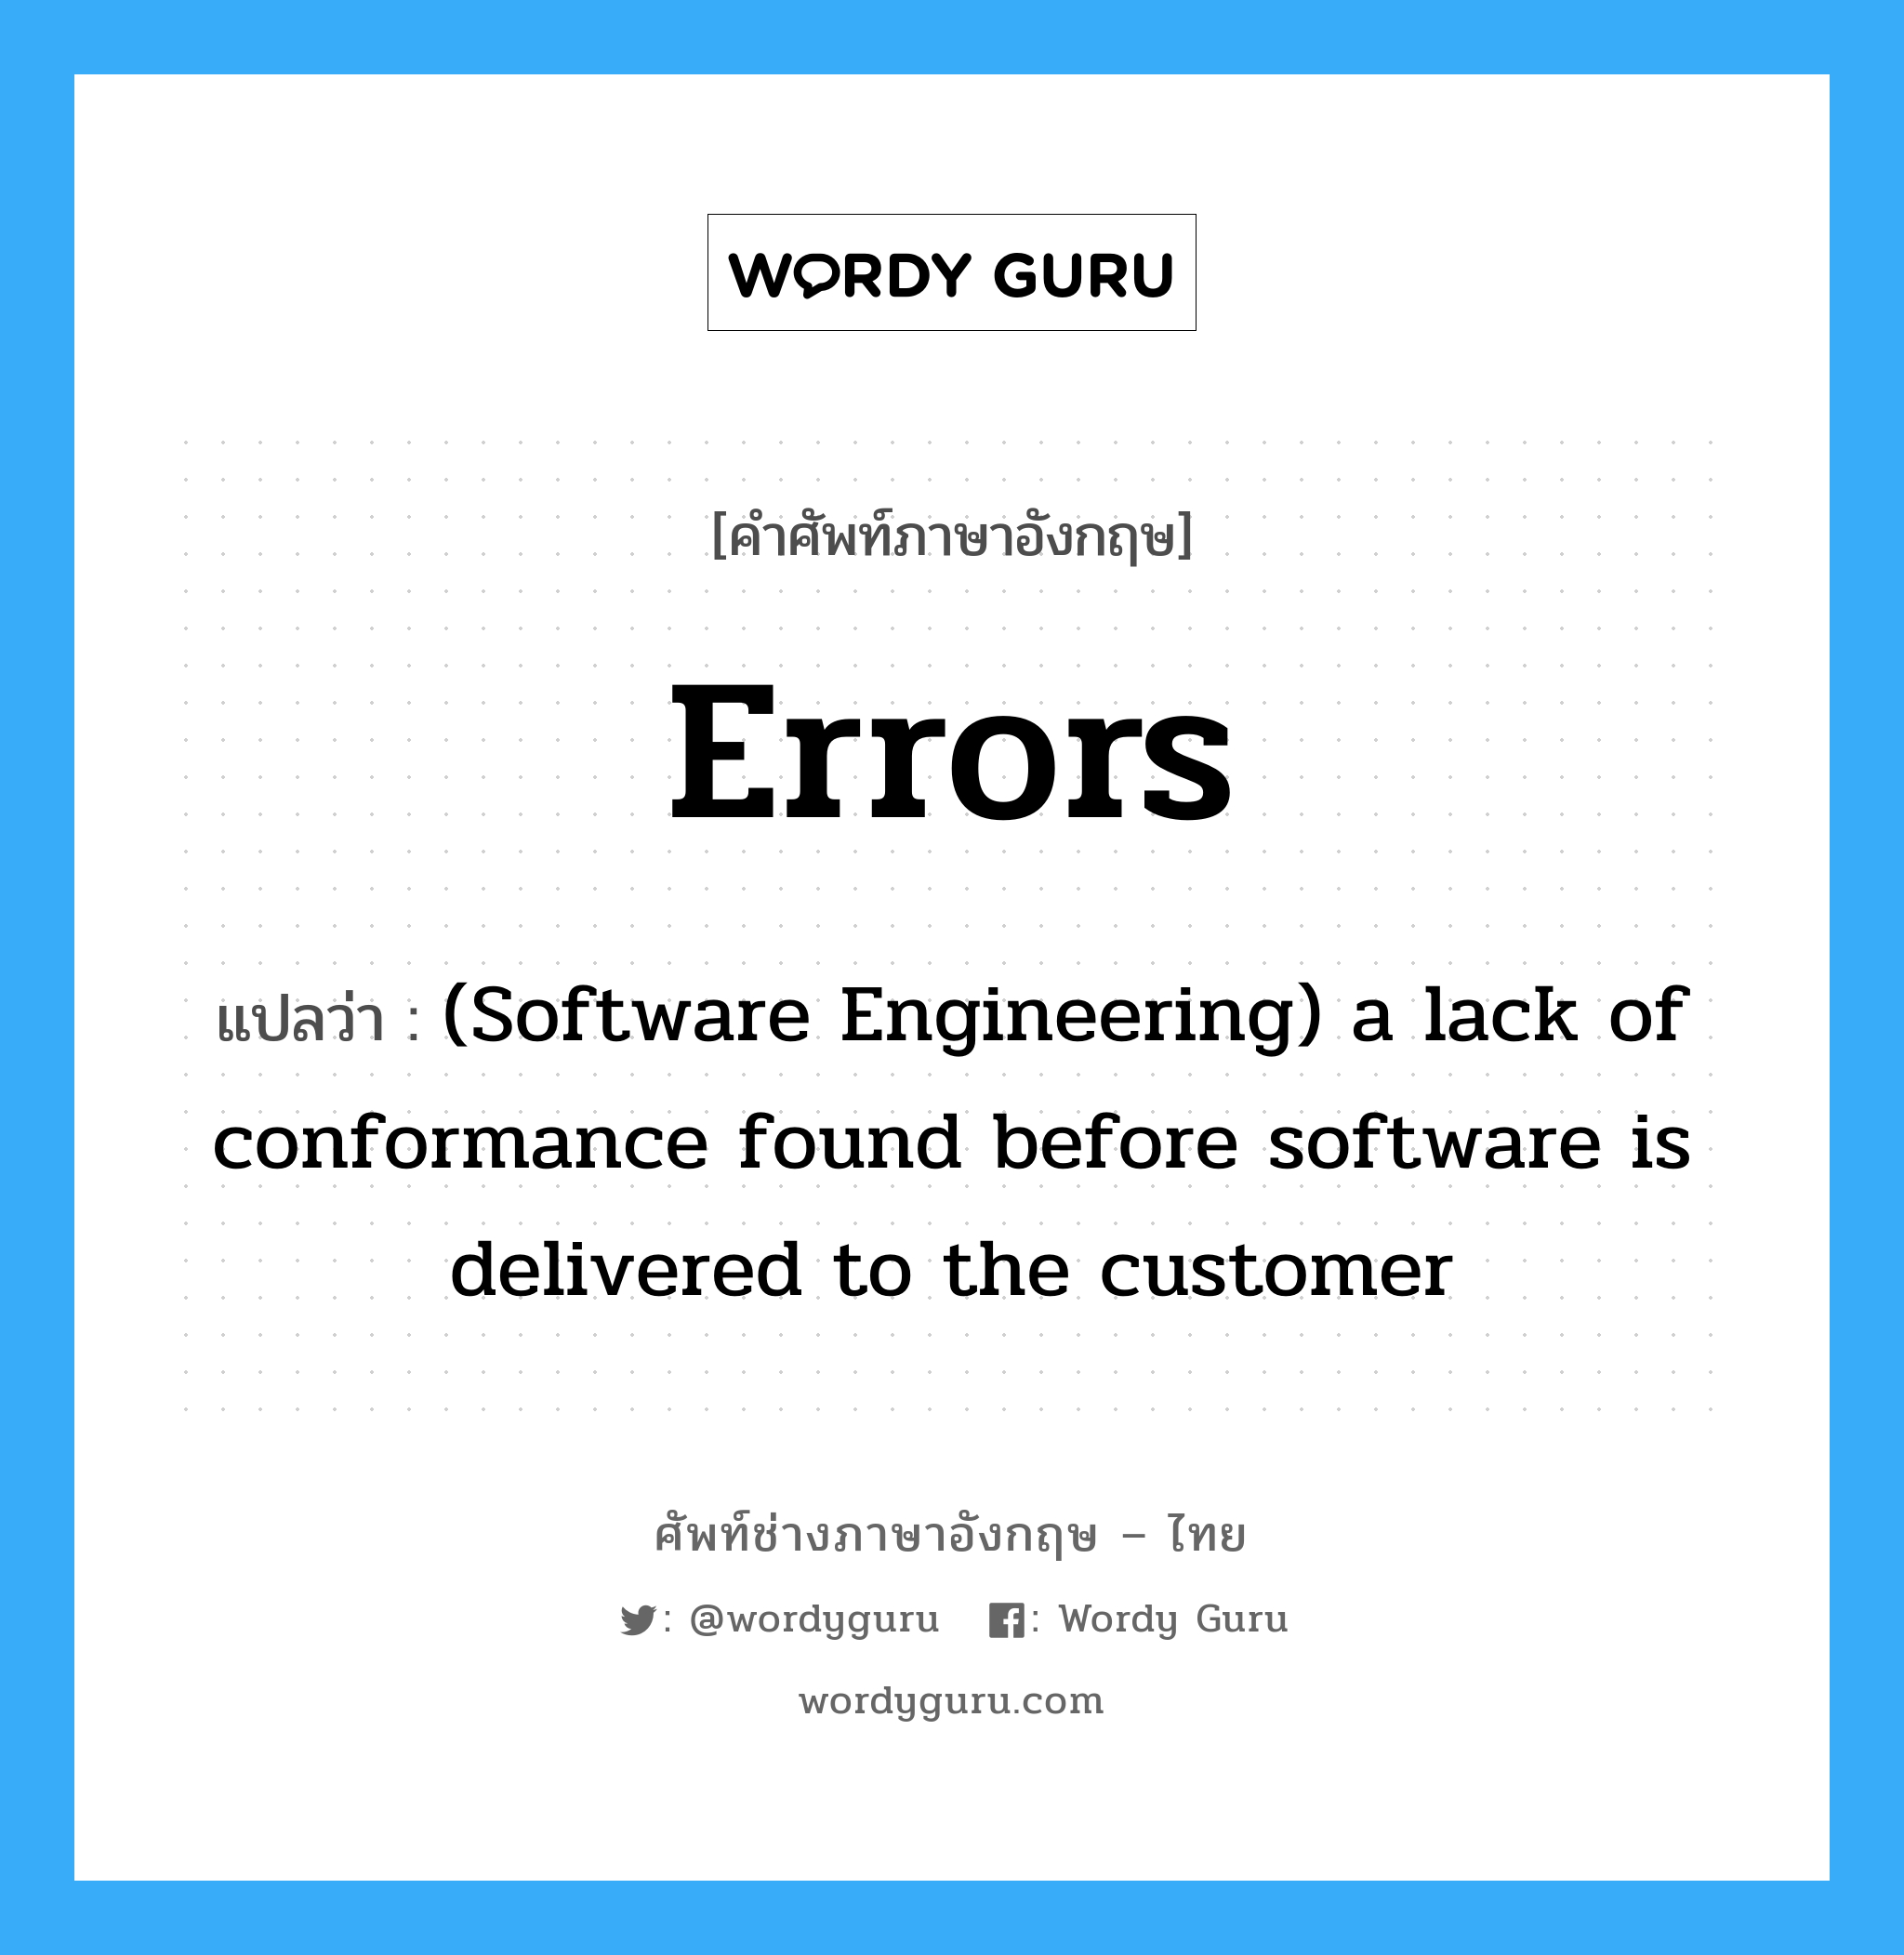 Errors แปลว่า?, คำศัพท์ช่างภาษาอังกฤษ - ไทย Errors คำศัพท์ภาษาอังกฤษ Errors แปลว่า (Software Engineering) a lack of conformance found before software is delivered to the customer